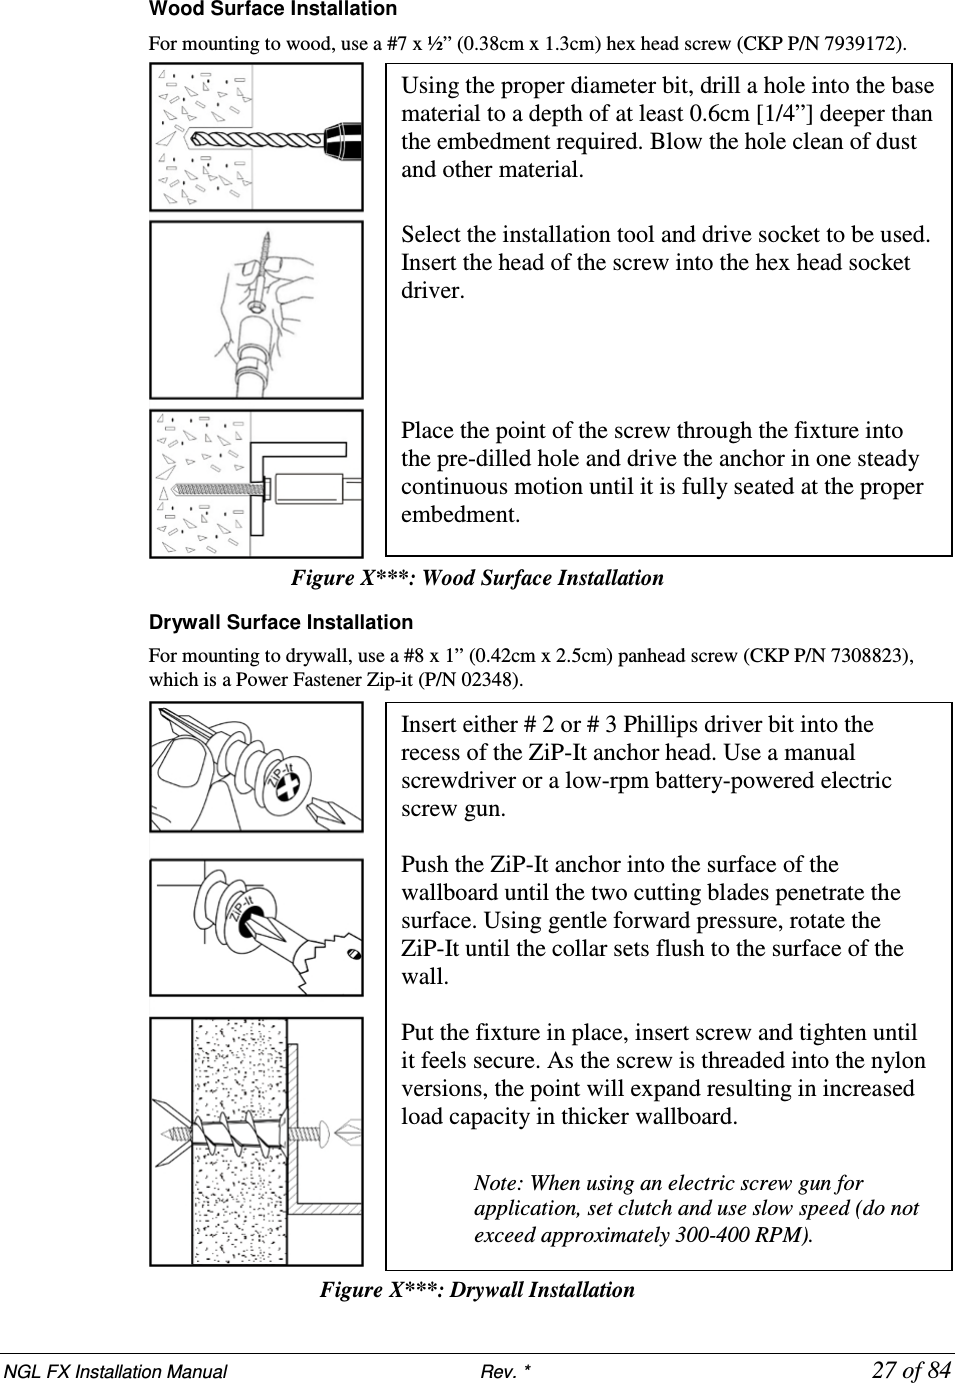 NGL FX Installation Manual                           Rev. *            27 of 84 Wood Surface Installation For mounting to wood, use a #7 x ½” (0.38cm x 1.3cm) hex head screw (CKP P/N 7939172).   Figure X***: Wood Surface Installation    Drywall Surface Installation For mounting to drywall, use a #8 x 1” (0.42cm x 2.5cm) panhead screw (CKP P/N 7308823), which is a Power Fastener Zip-it (P/N 02348).   Figure X***: Drywall Installation Using the proper diameter bit, drill a hole into the base material to a depth of at least 0.6cm [1/4”] deeper than the embedment required. Blow the hole clean of dust and other material.  Select the installation tool and drive socket to be used. Insert the head of the screw into the hex head socket driver.      Place the point of the screw through the fixture into the pre-dilled hole and drive the anchor in one steady continuous motion until it is fully seated at the proper embedment.  Insert either # 2 or # 3 Phillips driver bit into the recess of the ZiP-It anchor head. Use a manual screwdriver or a low-rpm battery-powered electric screw gun.  Push the ZiP-It anchor into the surface of the wallboard until the two cutting blades penetrate the surface. Using gentle forward pressure, rotate the ZiP-It until the collar sets flush to the surface of the wall.  Put the fixture in place, insert screw and tighten until it feels secure. As the screw is threaded into the nylon versions, the point will expand resulting in increased load capacity in thicker wallboard.   Note: When using an electric screw gun for application, set clutch and use slow speed (do not exceed approximately 300-400 RPM). 